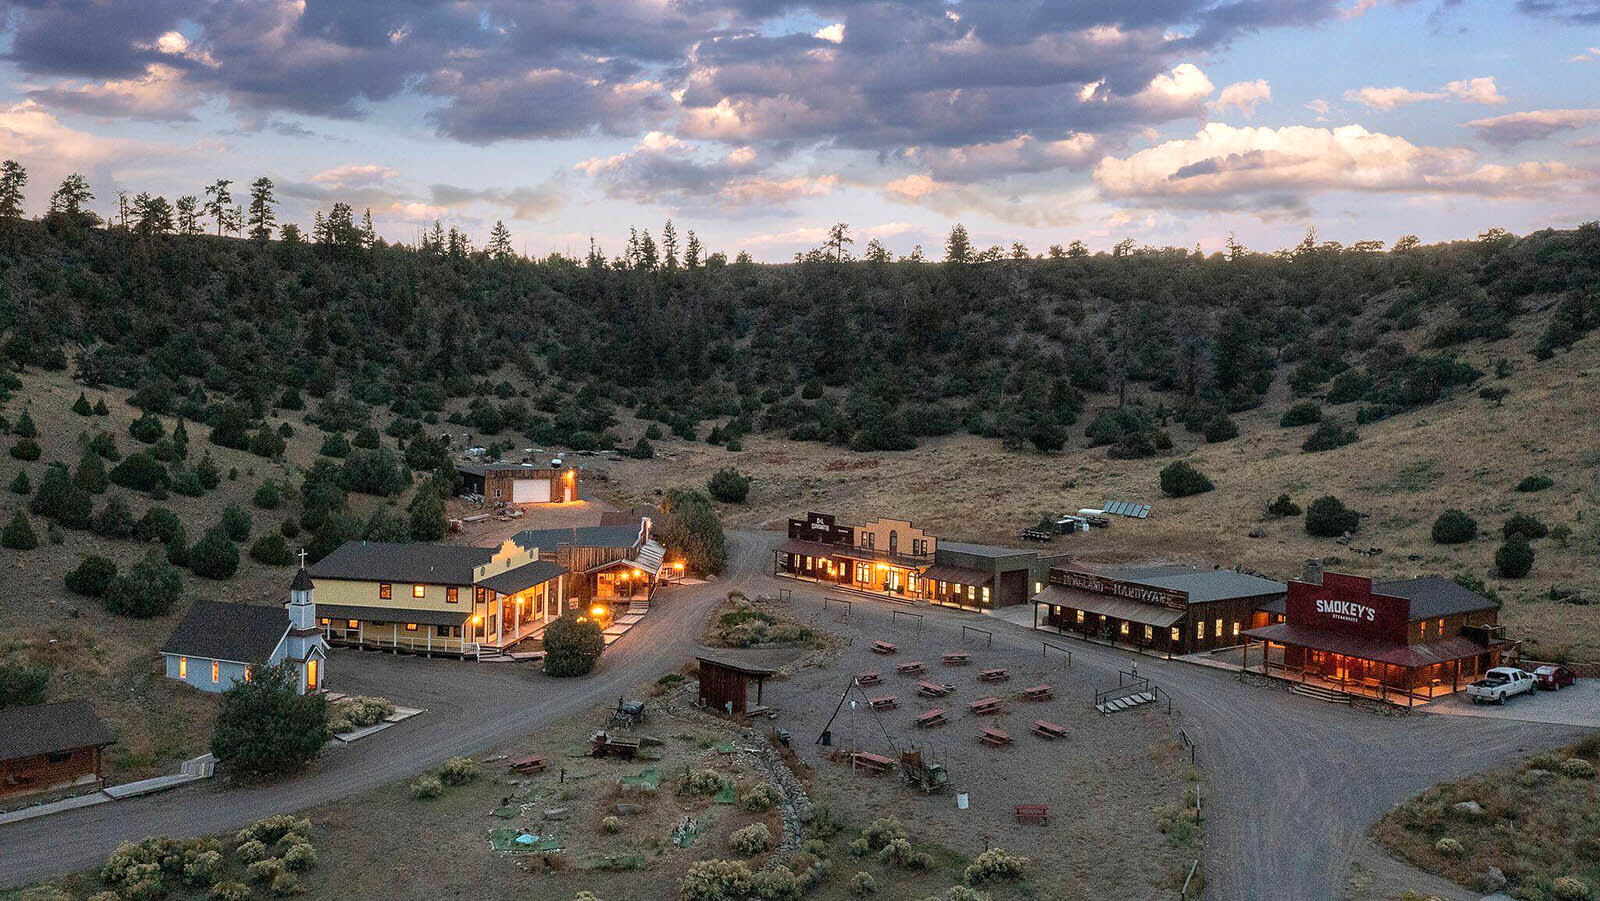 For Sale: Ranch With Complete Old West Town, Only $3.7 million